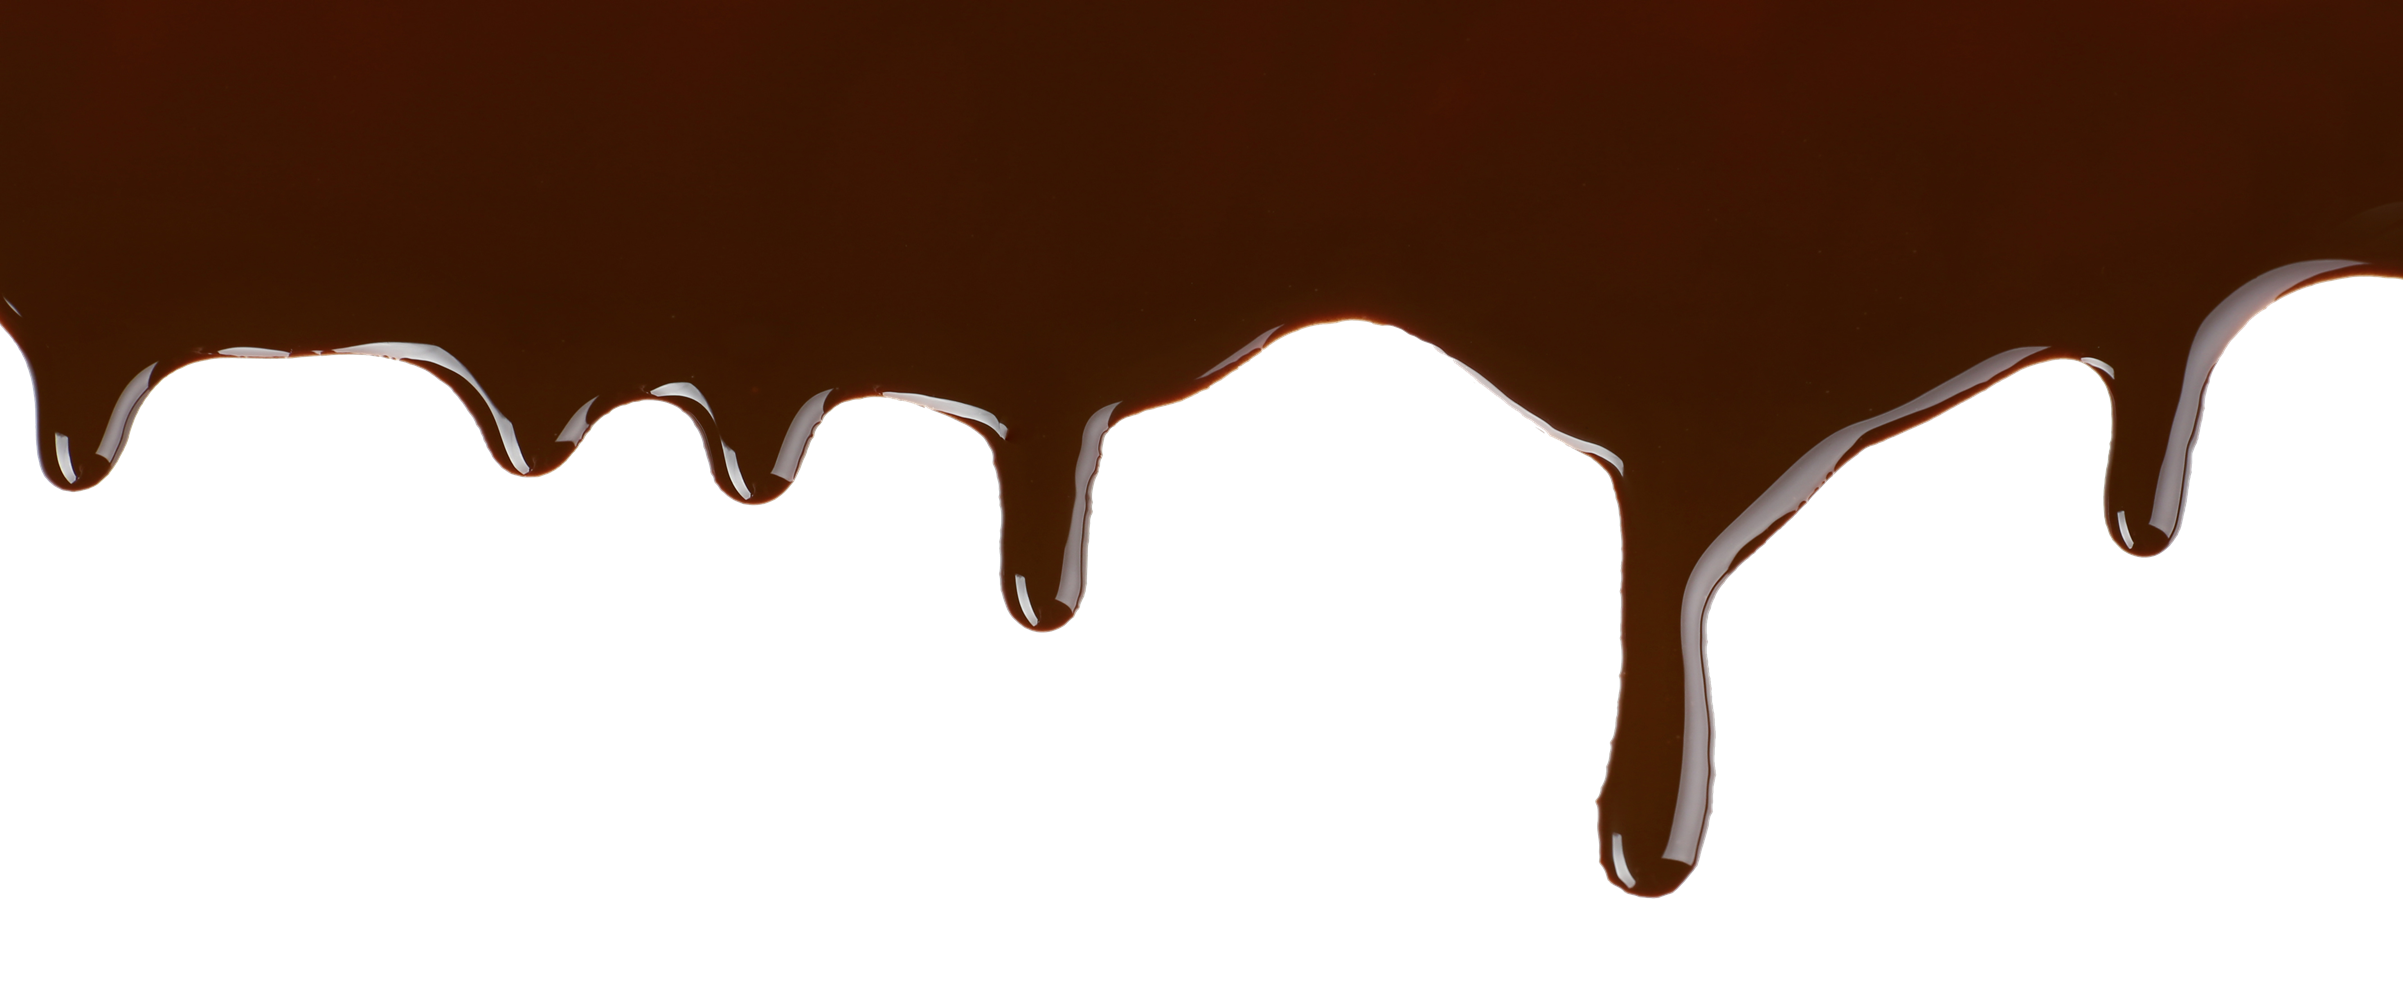 Png File Name: Melted Chocolate Hdpng.com  - Chocolate, Transparent background PNG HD thumbnail